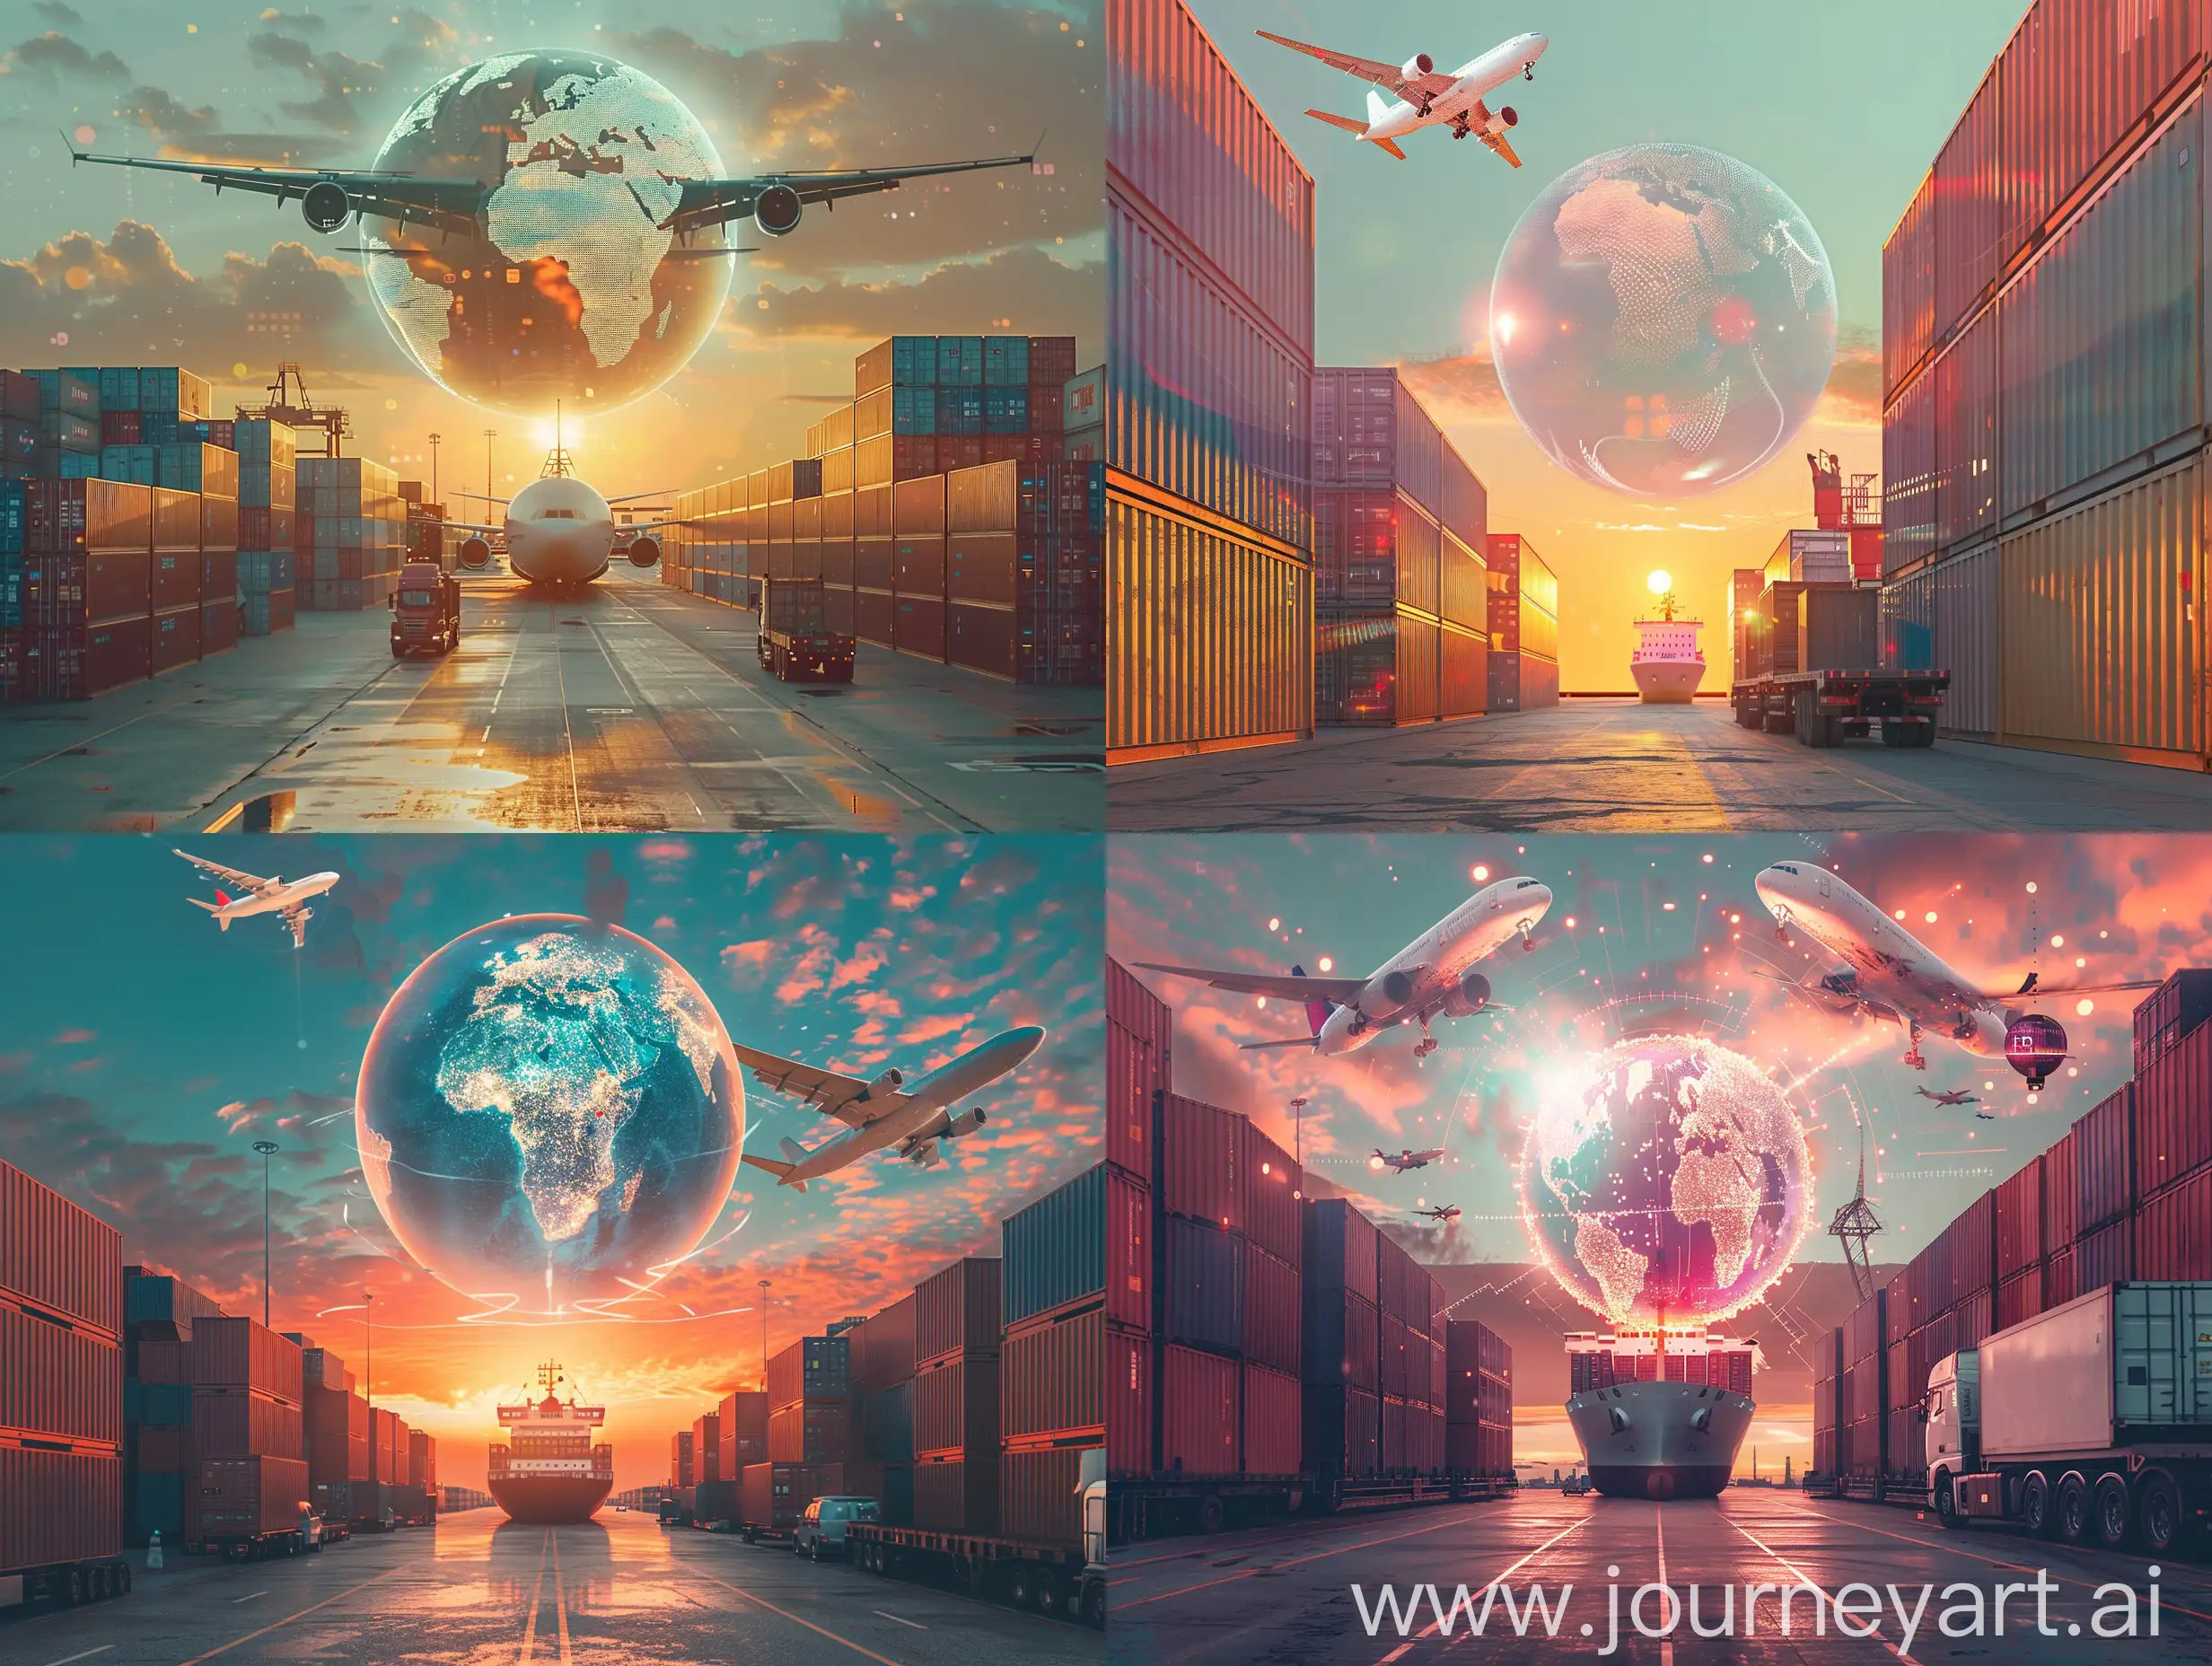 sunset scene, clean sky, a big transparent globe hologram at the center in the background, big white airplane flying around the globe, containers stacked on either side at the bottom, big cargo ship at the bottom center carrying loads very close to the camera, a couple trucks on the scene. make everything blend together, stock image photography style, simple photography without too much detail
 